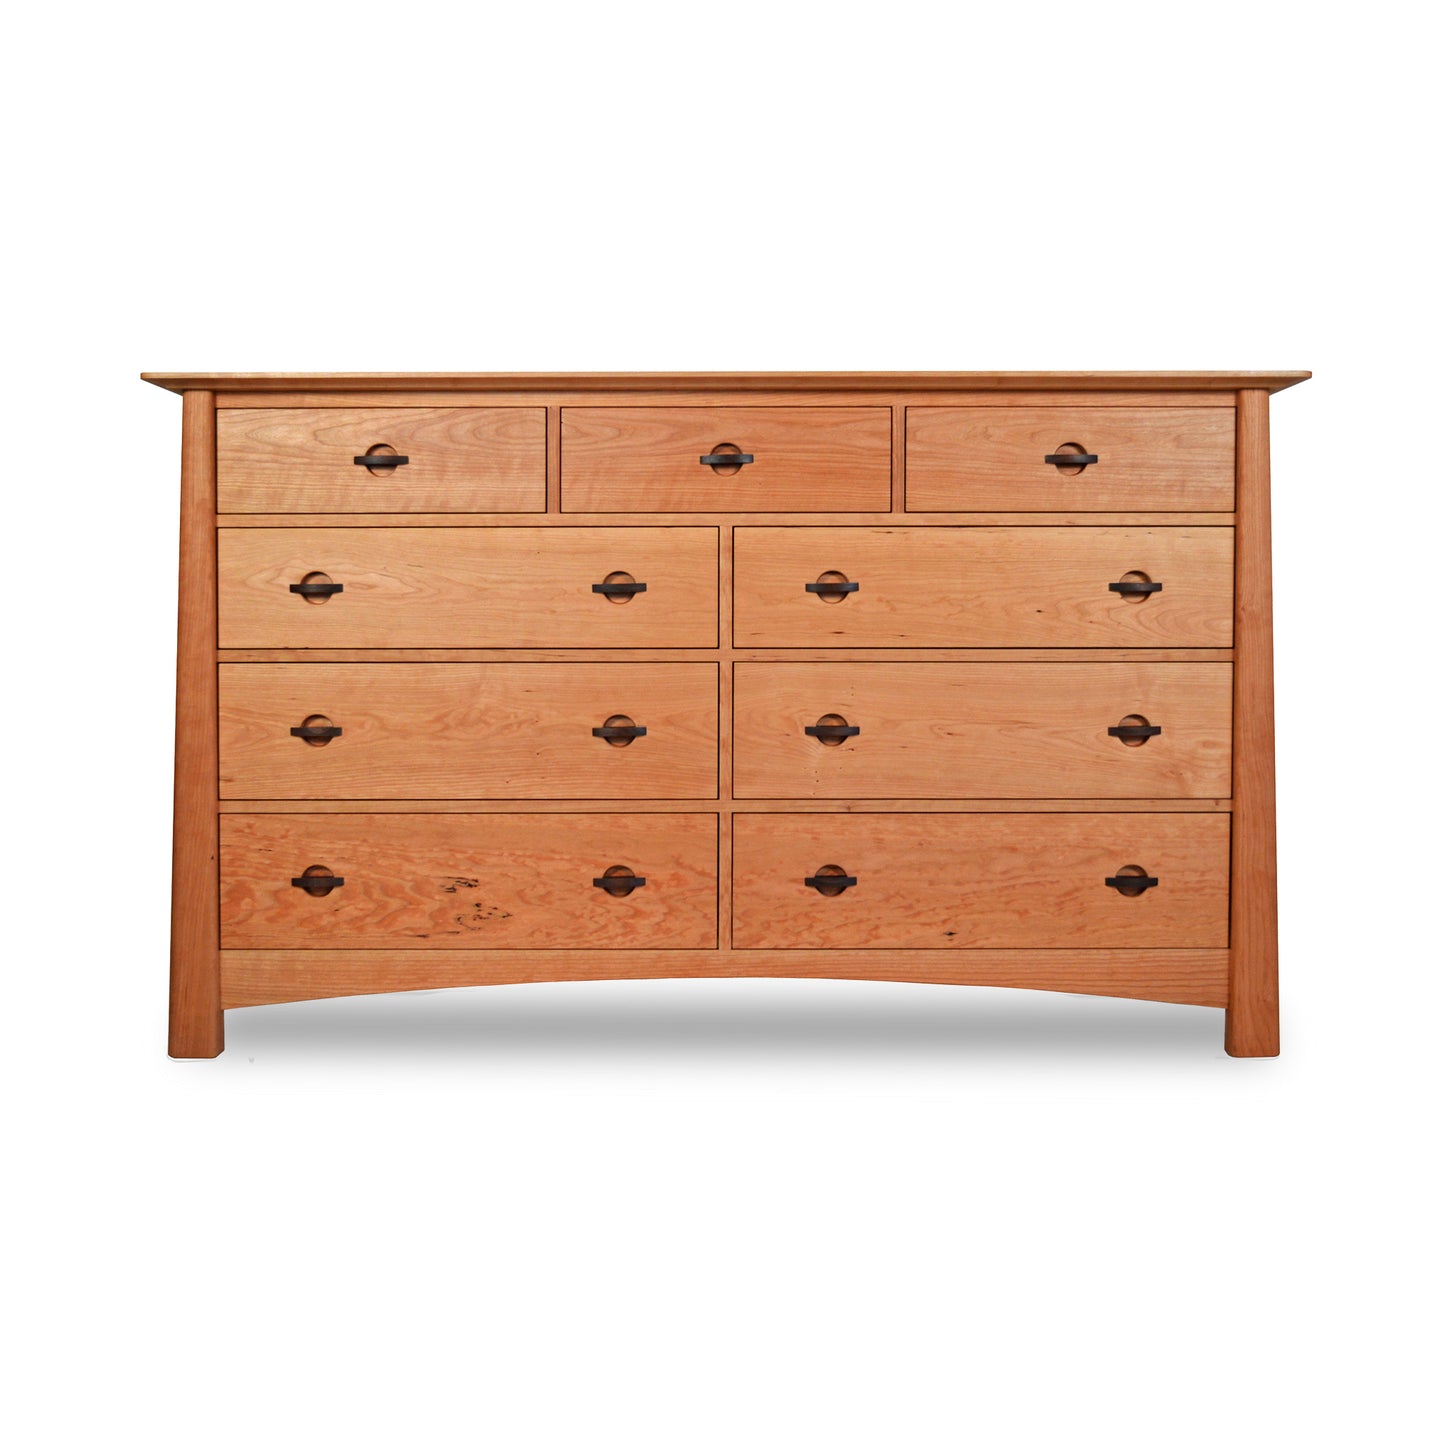 A Cherry Moon 9-Drawer Dresser with a light brown finish featuring two rows of small drawers at the top and two larger rows of drawers below, each with round metal handles, against a white background. This eco-friendly dresser by Maple Corner Woodworks.